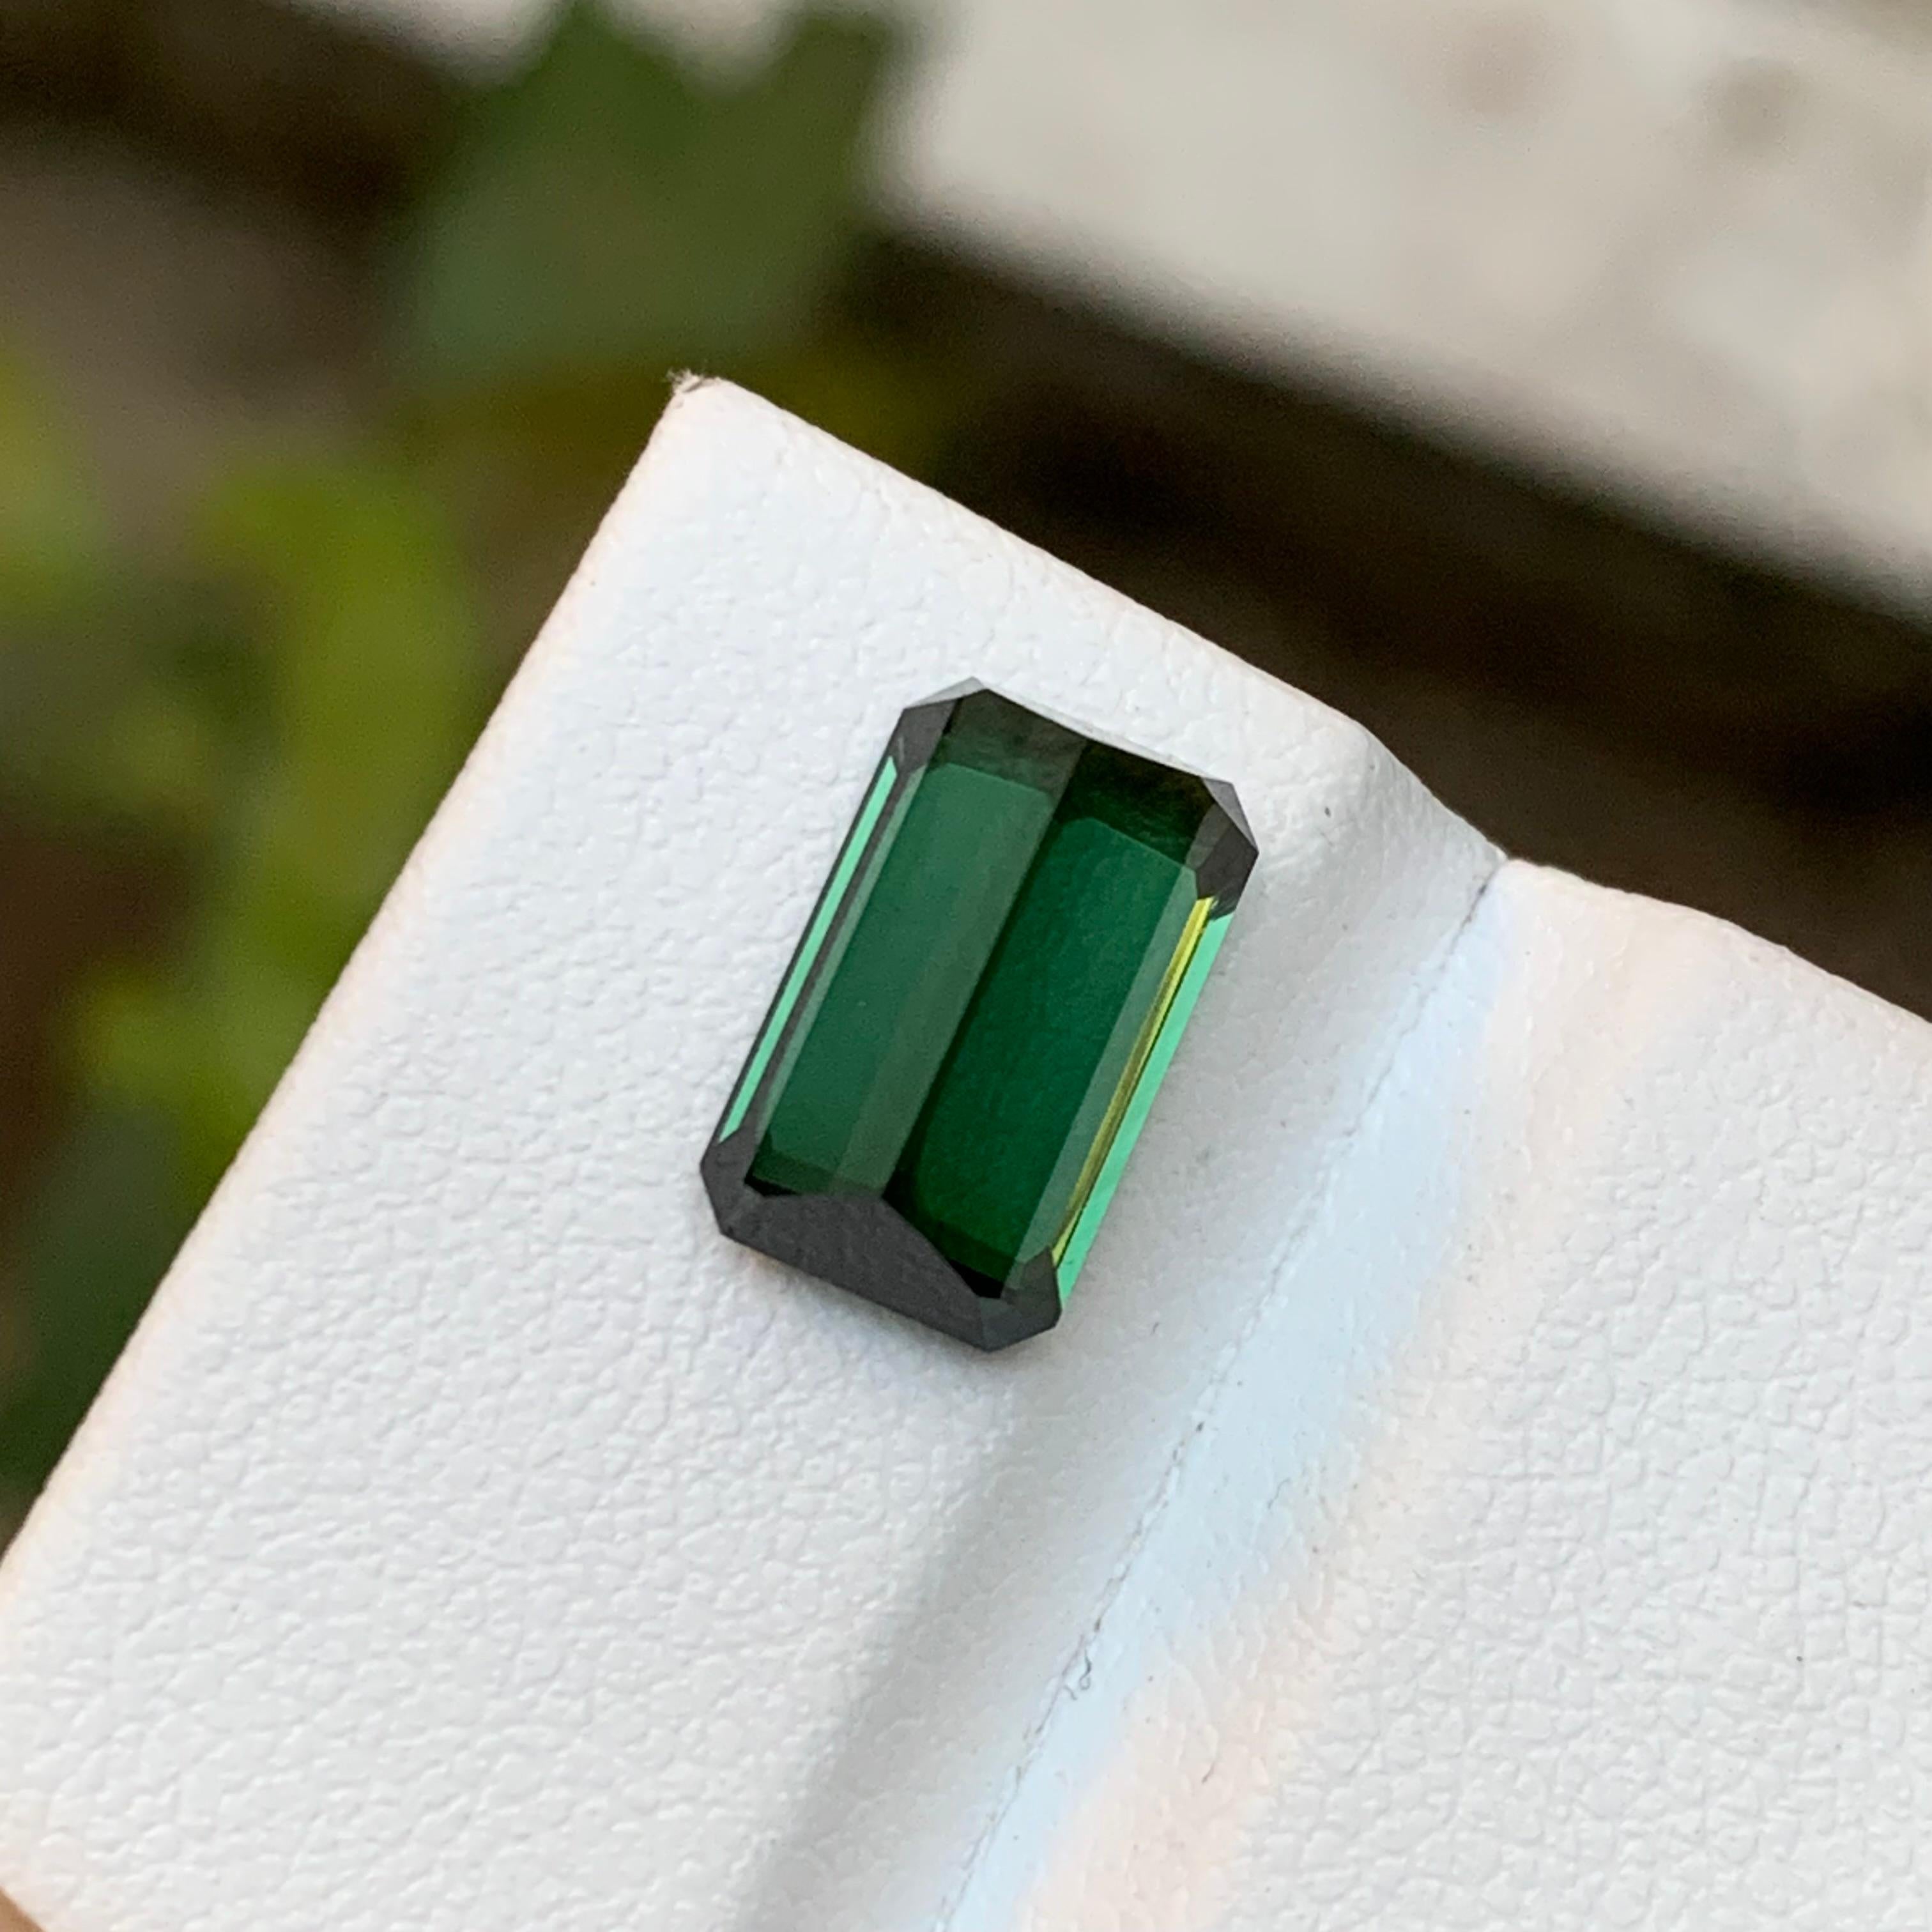 Rare Deep Green Natural Tourmaline Loose Gemstone, 3.75 Ct Emerald Cut for Ring For Sale 4